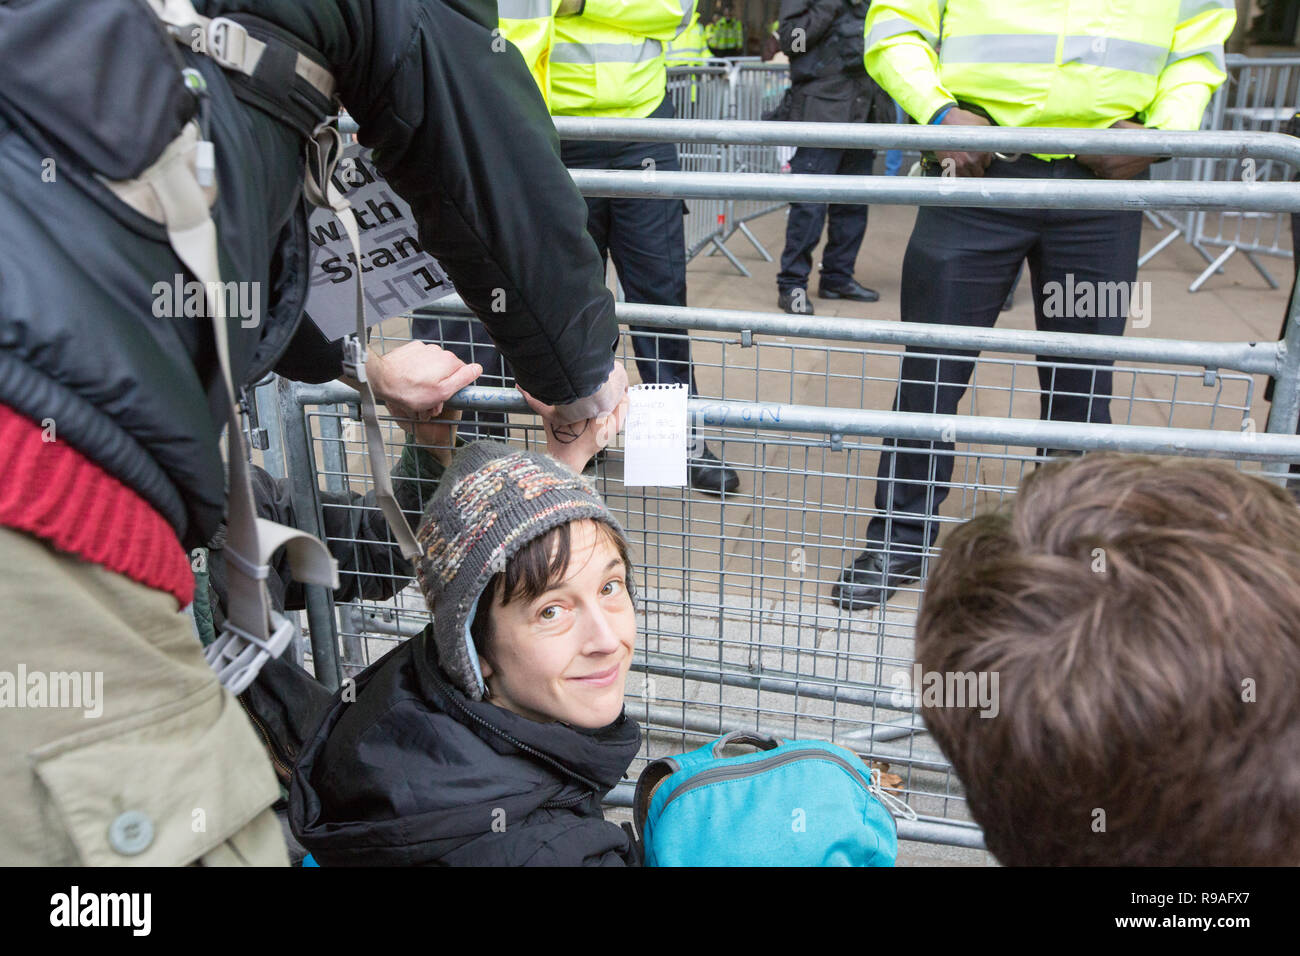 London, UK. 21st December, 2018. Extinction Rebbelion use Direct Action outside the BBC Credit: George Cracknell Wright/Alamy Live News Stock Photo